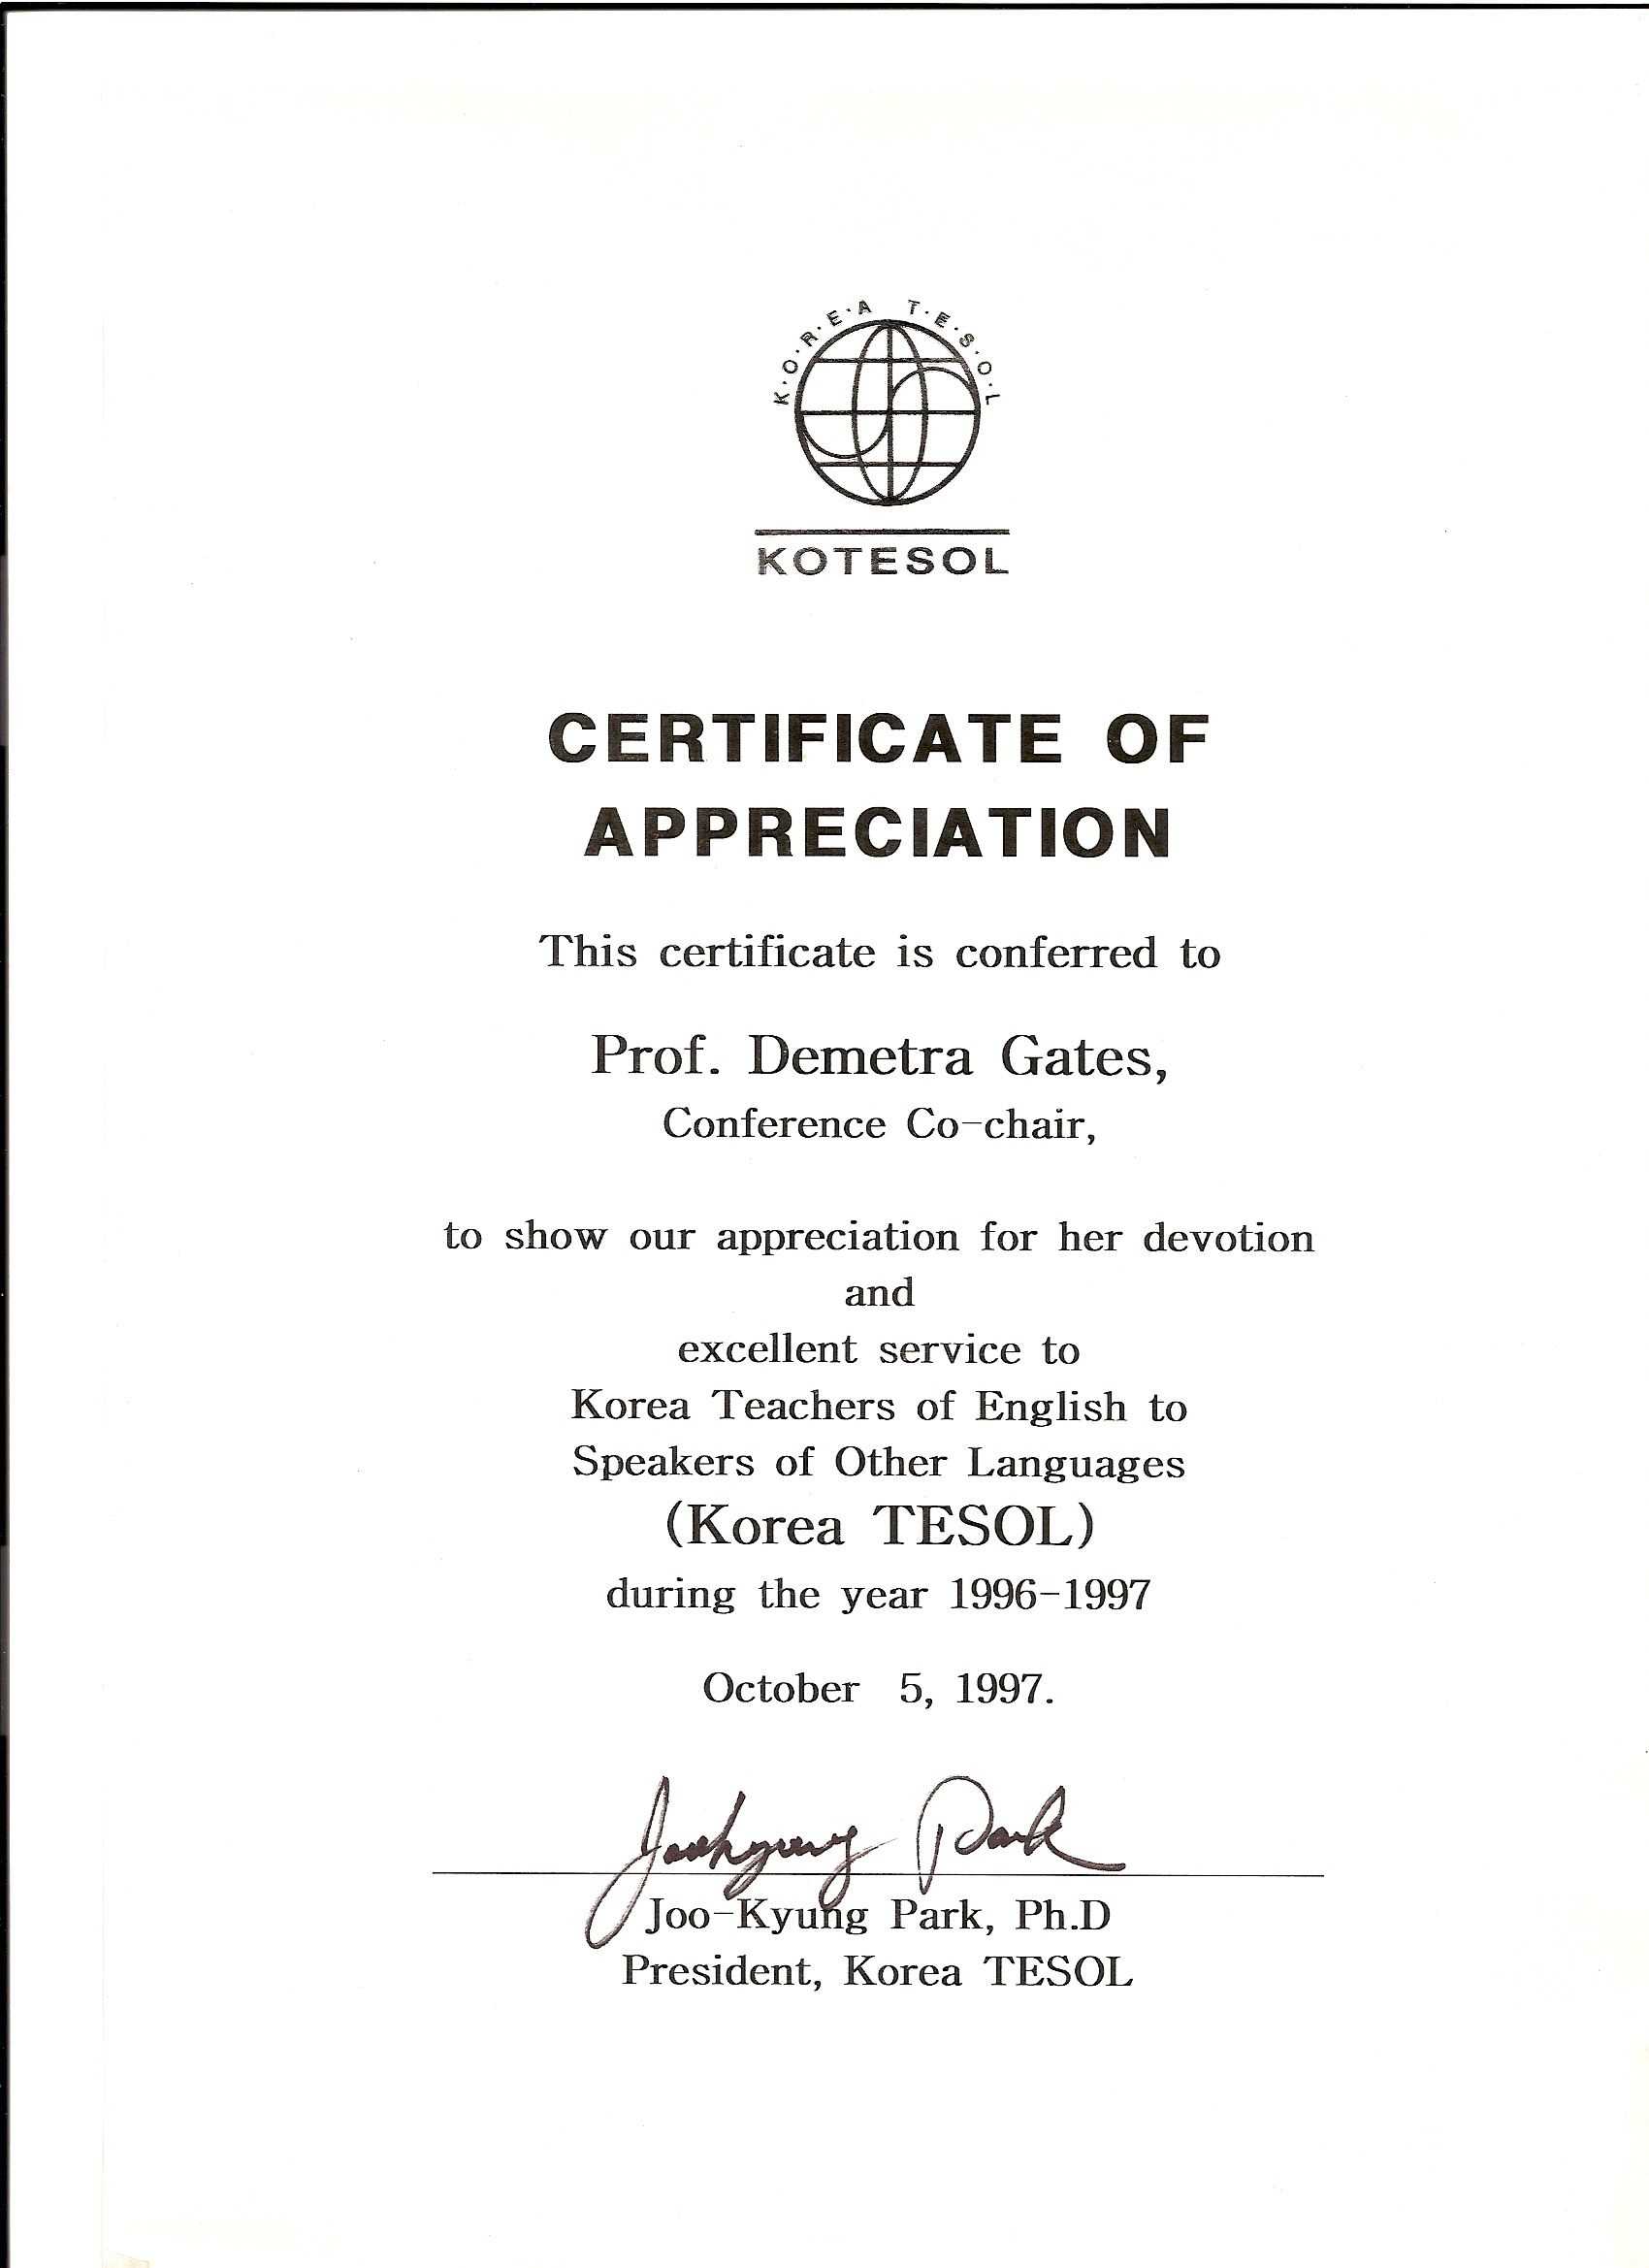 Kotesol Presidential Certificate Of Appreciation (1997 For In Certificate Of Achievement Army Template